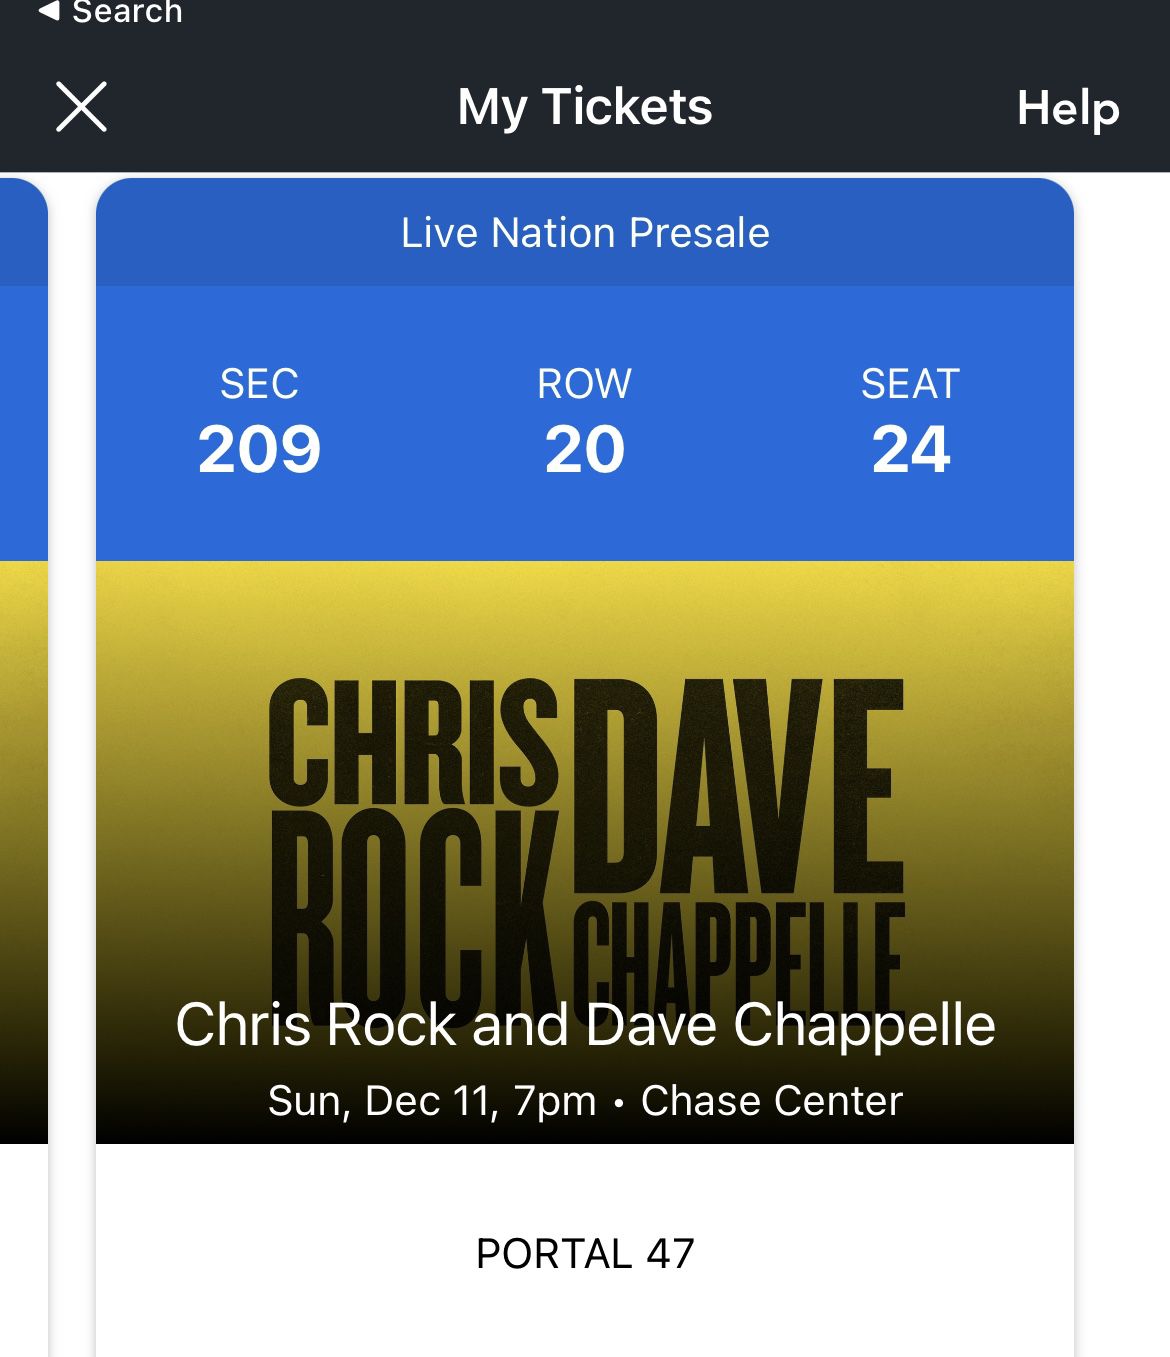 Dave Chappelle And Chris Rock Ticket At Chase Center 12/11